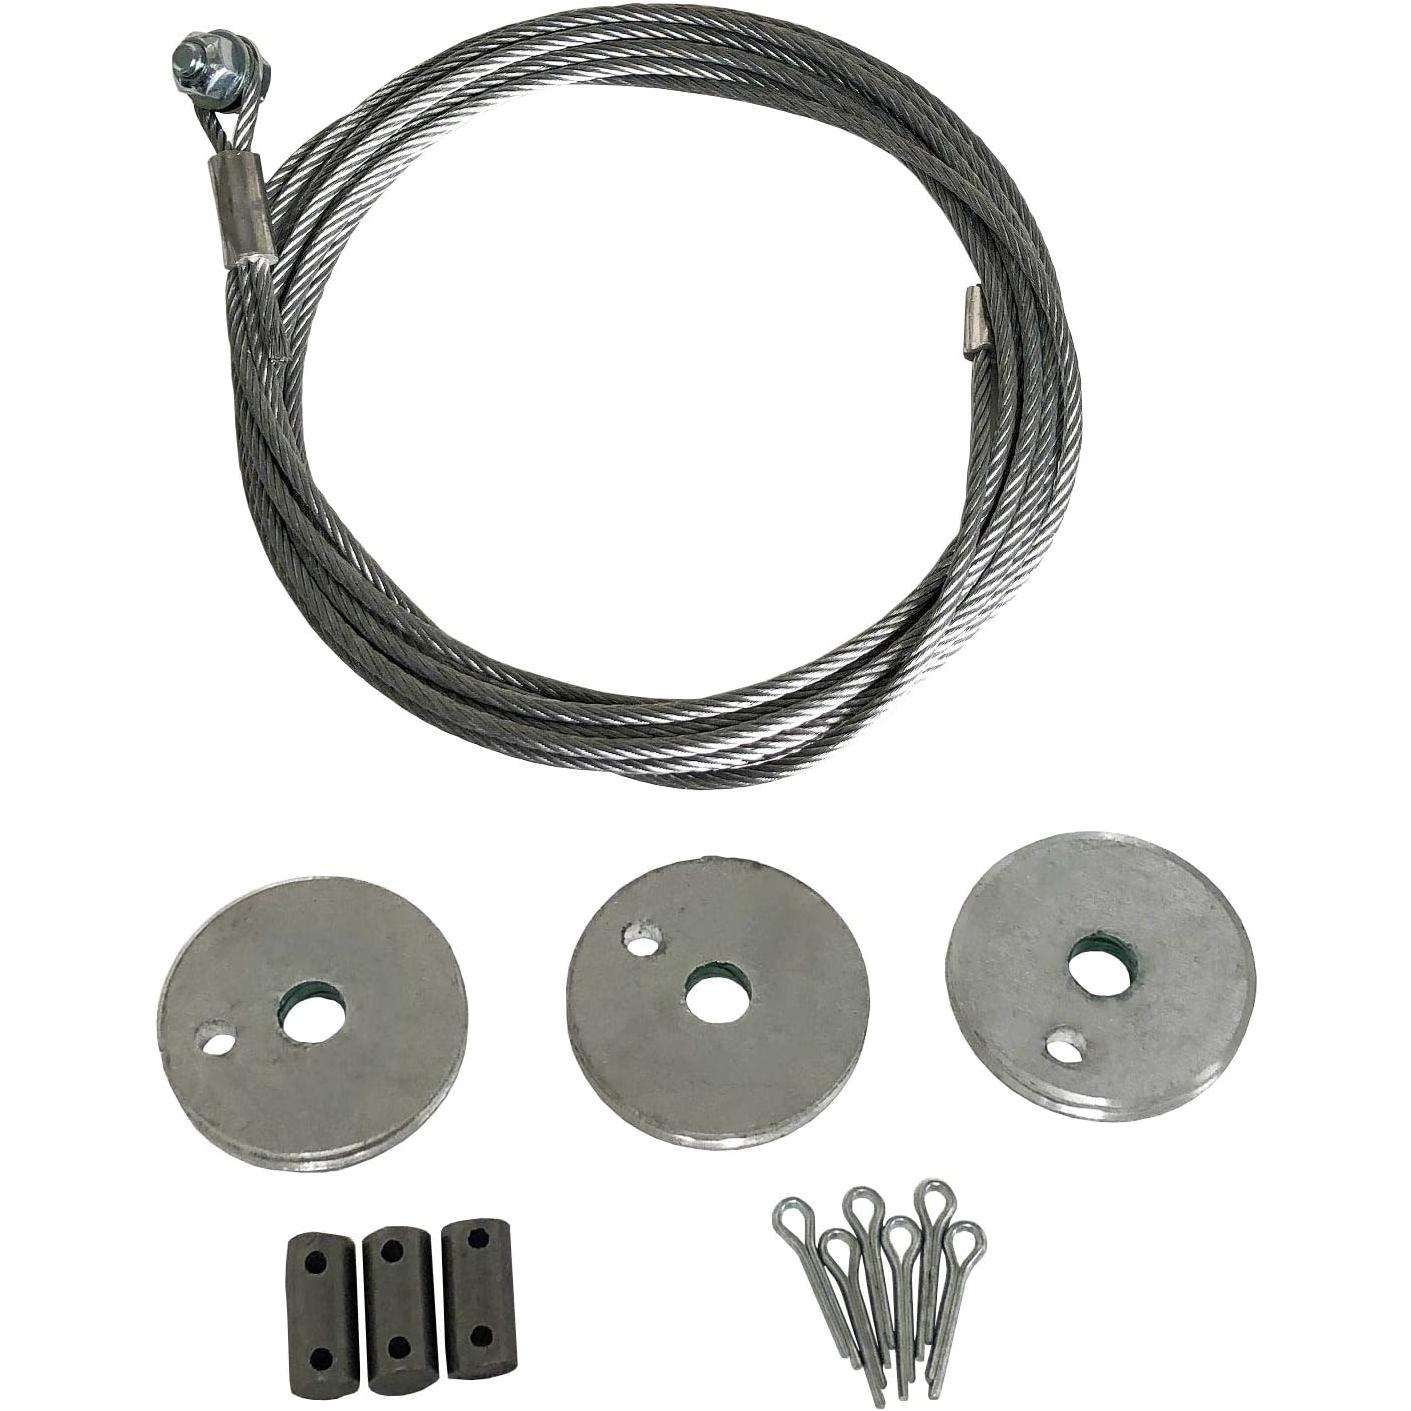 Panellift Drywall Lift Part 02-16 Replacement Cable/Sheave Bundle for models 125/138-2